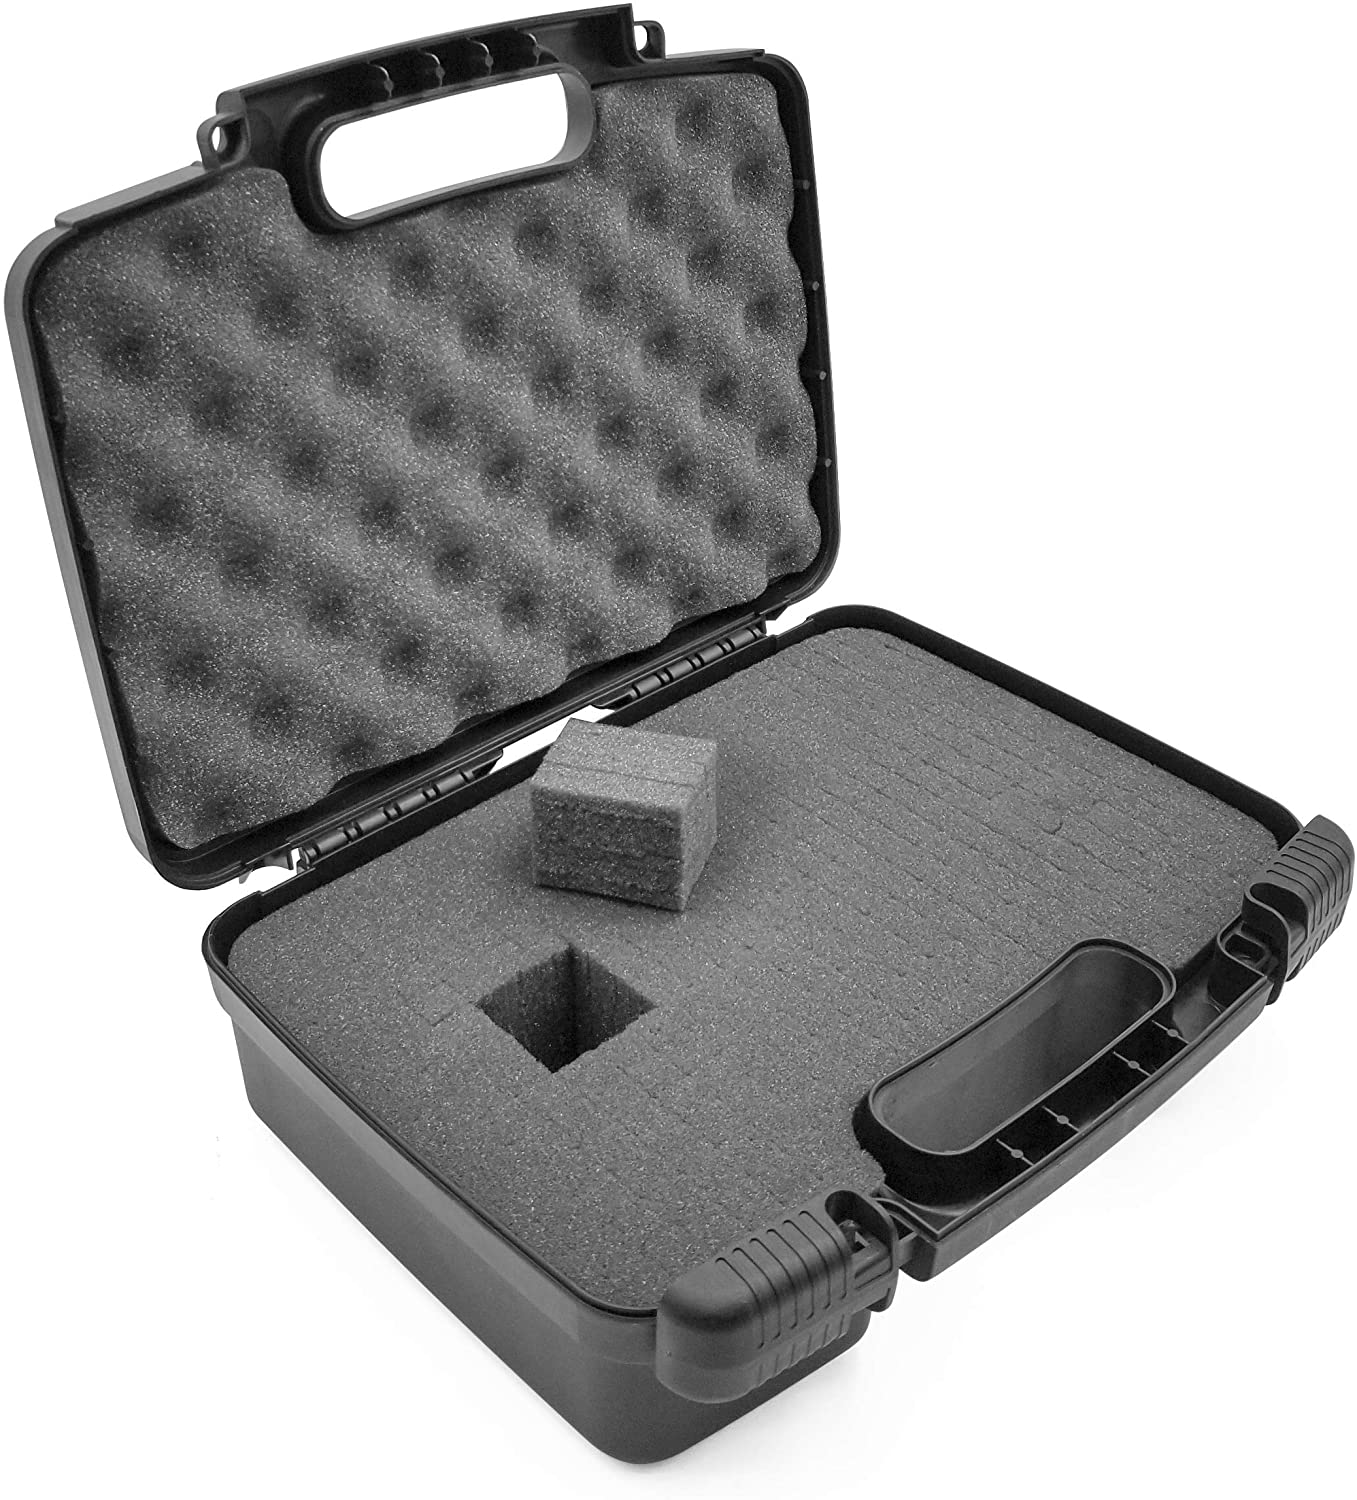 Casematix Portable Projector Carrying Hard Case with Customizable Foam Fits Sony Pico